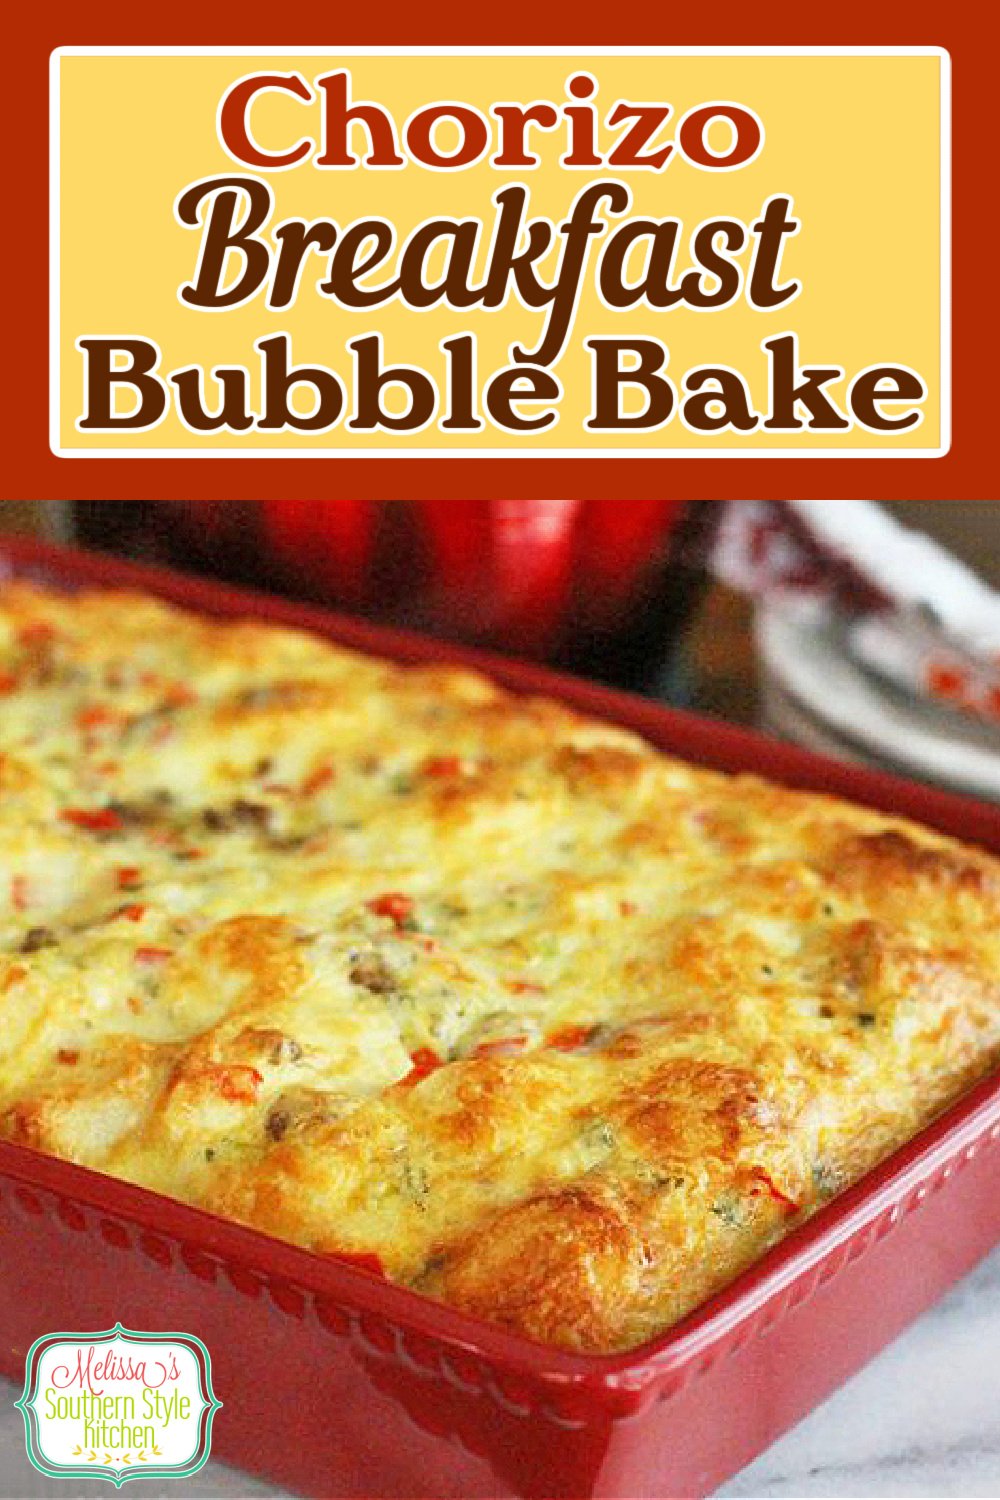 Make ahead Chorizo Breakfast Bubble Bake can be assembled in advance then baked when you're ready to eat #breakfastcasserole #brunchcasserole #makeaheadcasseroles #holidaybrunch #holidayrecipes #brunchrecipes #bubblup #bubblebake #overnightcasseroles #christmas #thanksgiving #southernrecipes #southernfood #melissassouthernstylekitchen via @melissasssk